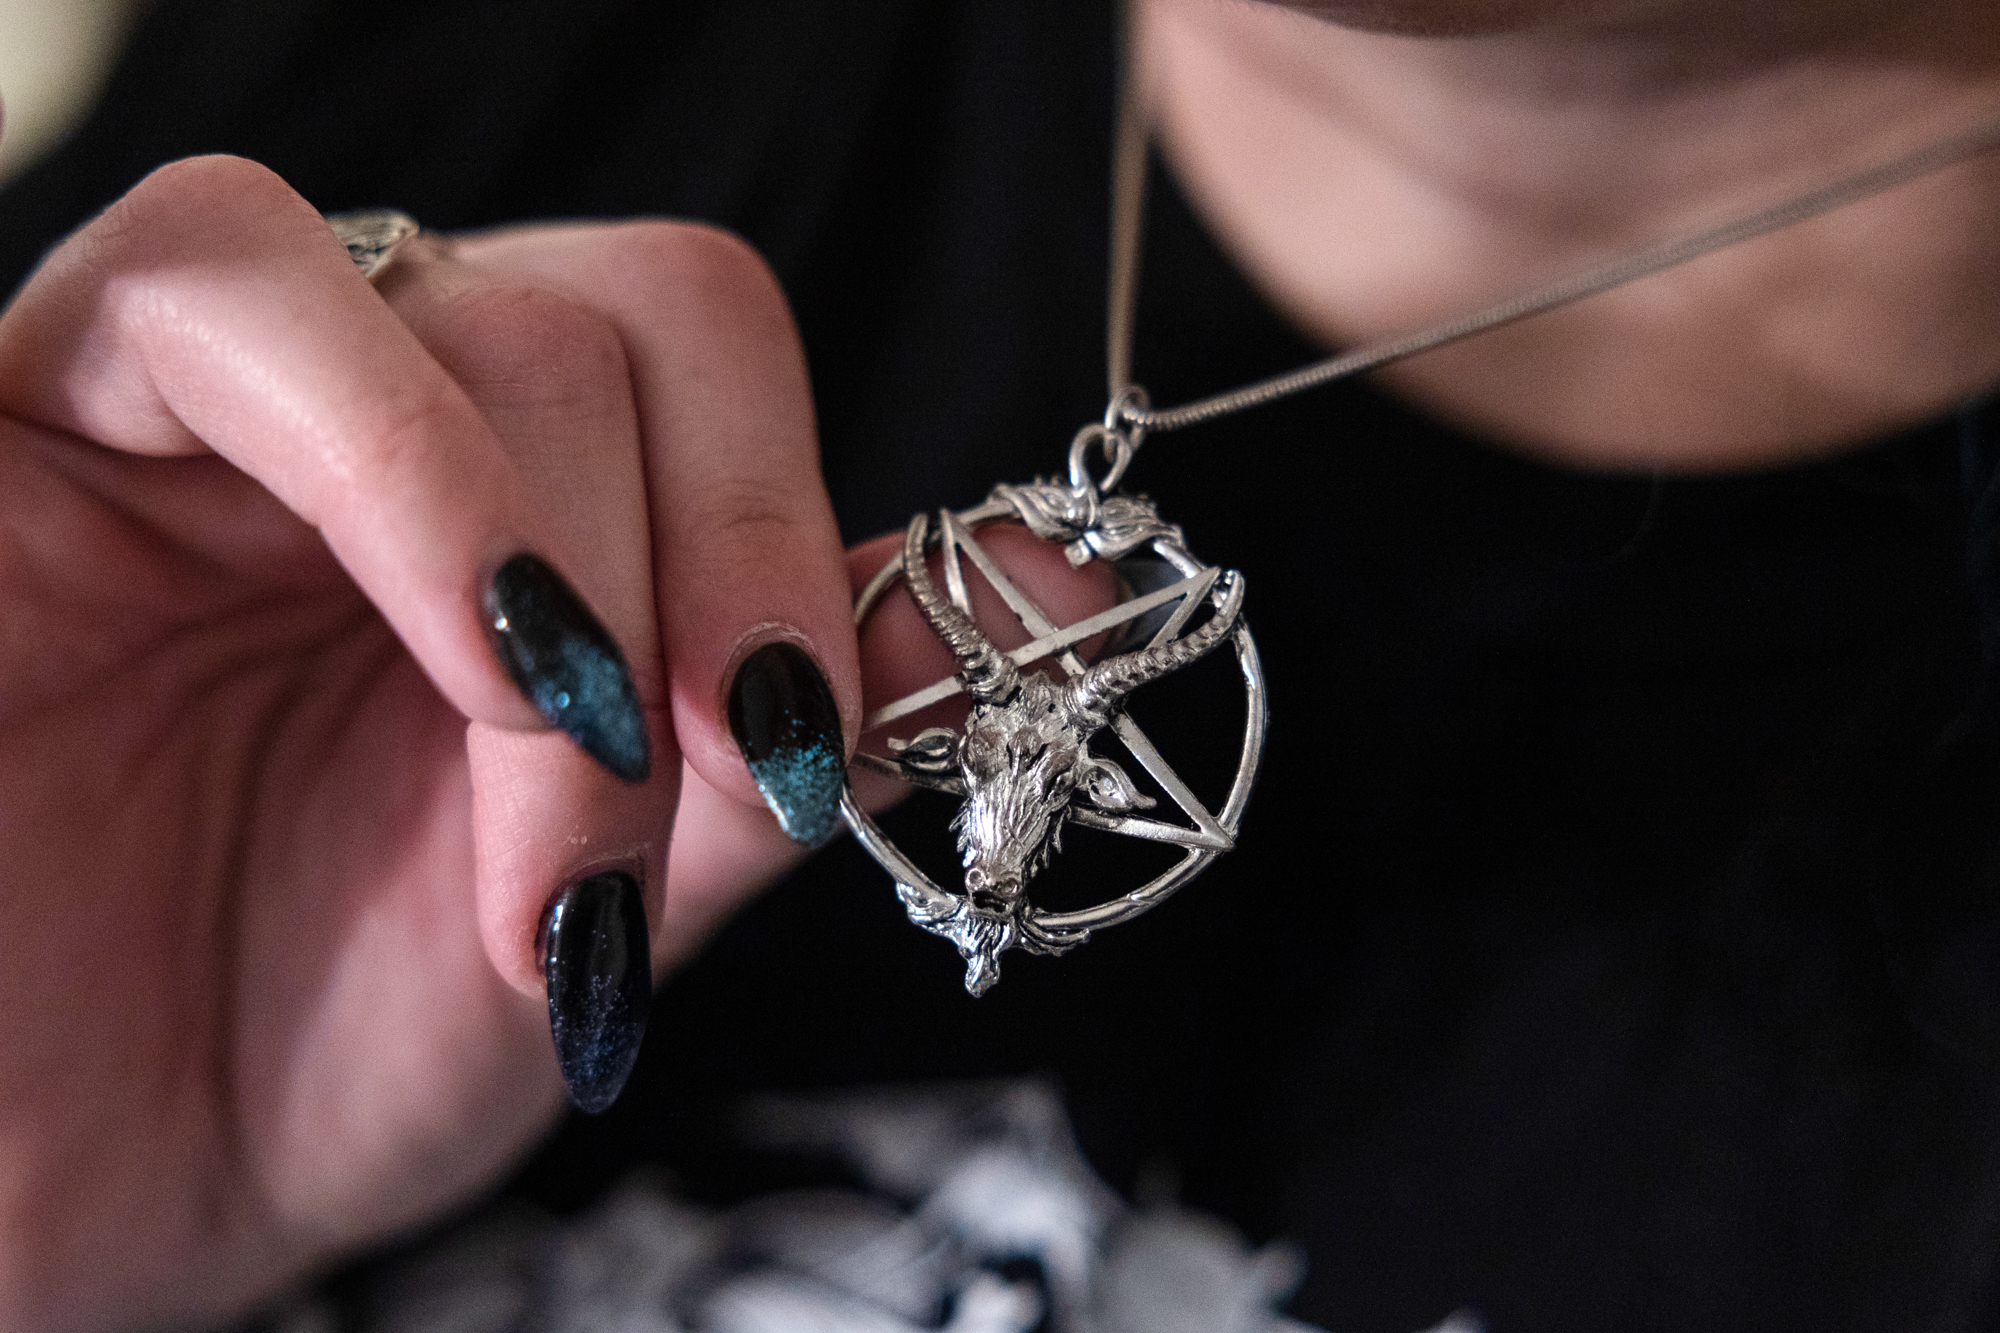 A woman's hand holding a silver baphomet necklace.